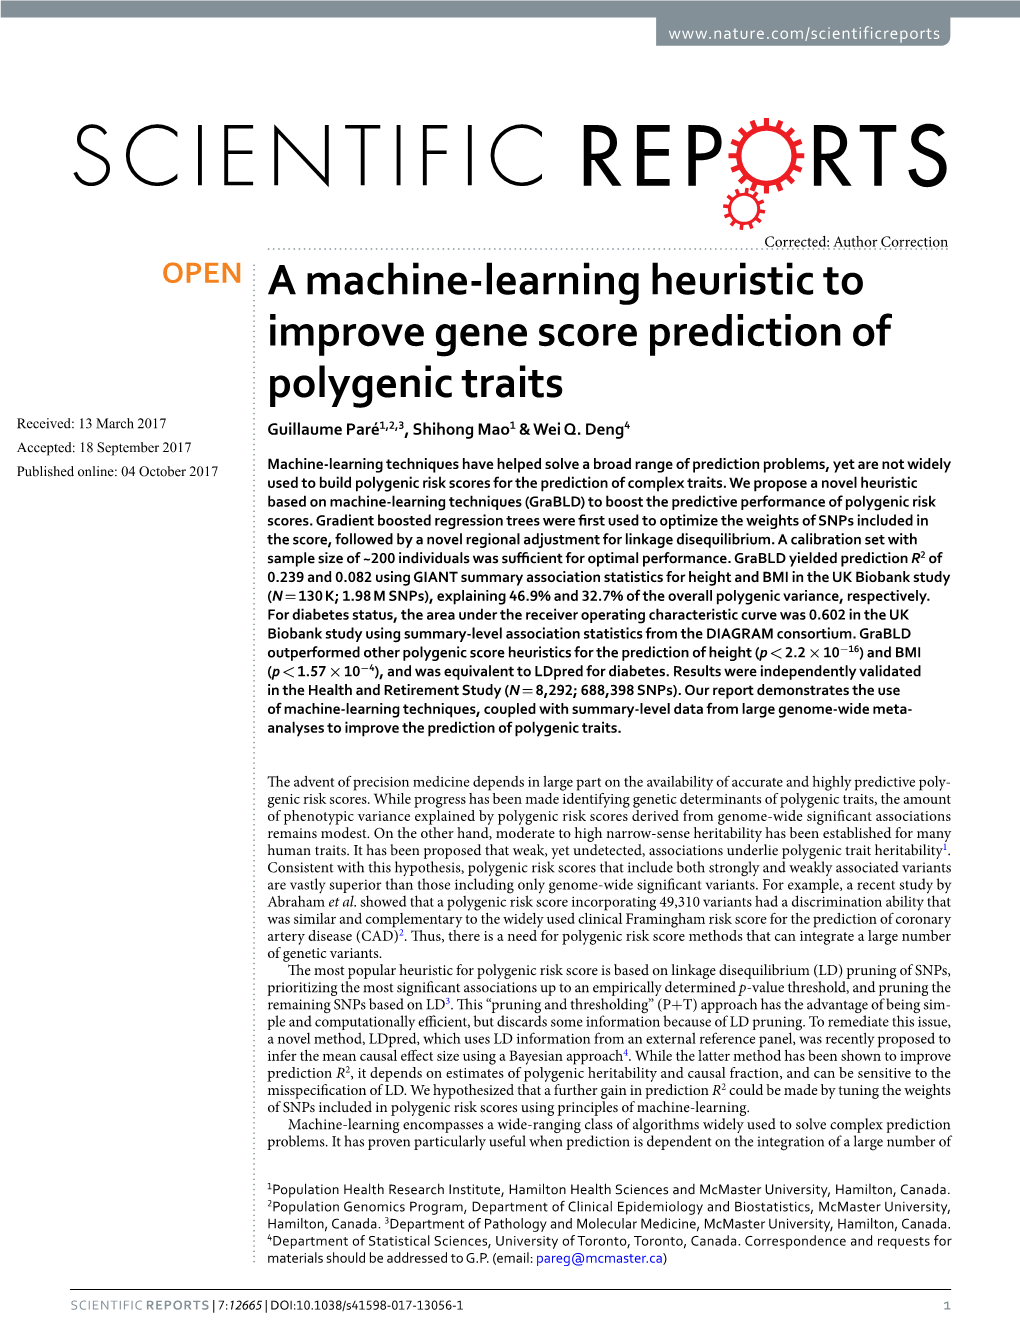 A Machine-Learning Heuristic to Improve Gene Score Prediction of Polygenic Traits Received: 13 March 2017 Guillaume Paré1,2,3, Shihong Mao1 & Wei Q